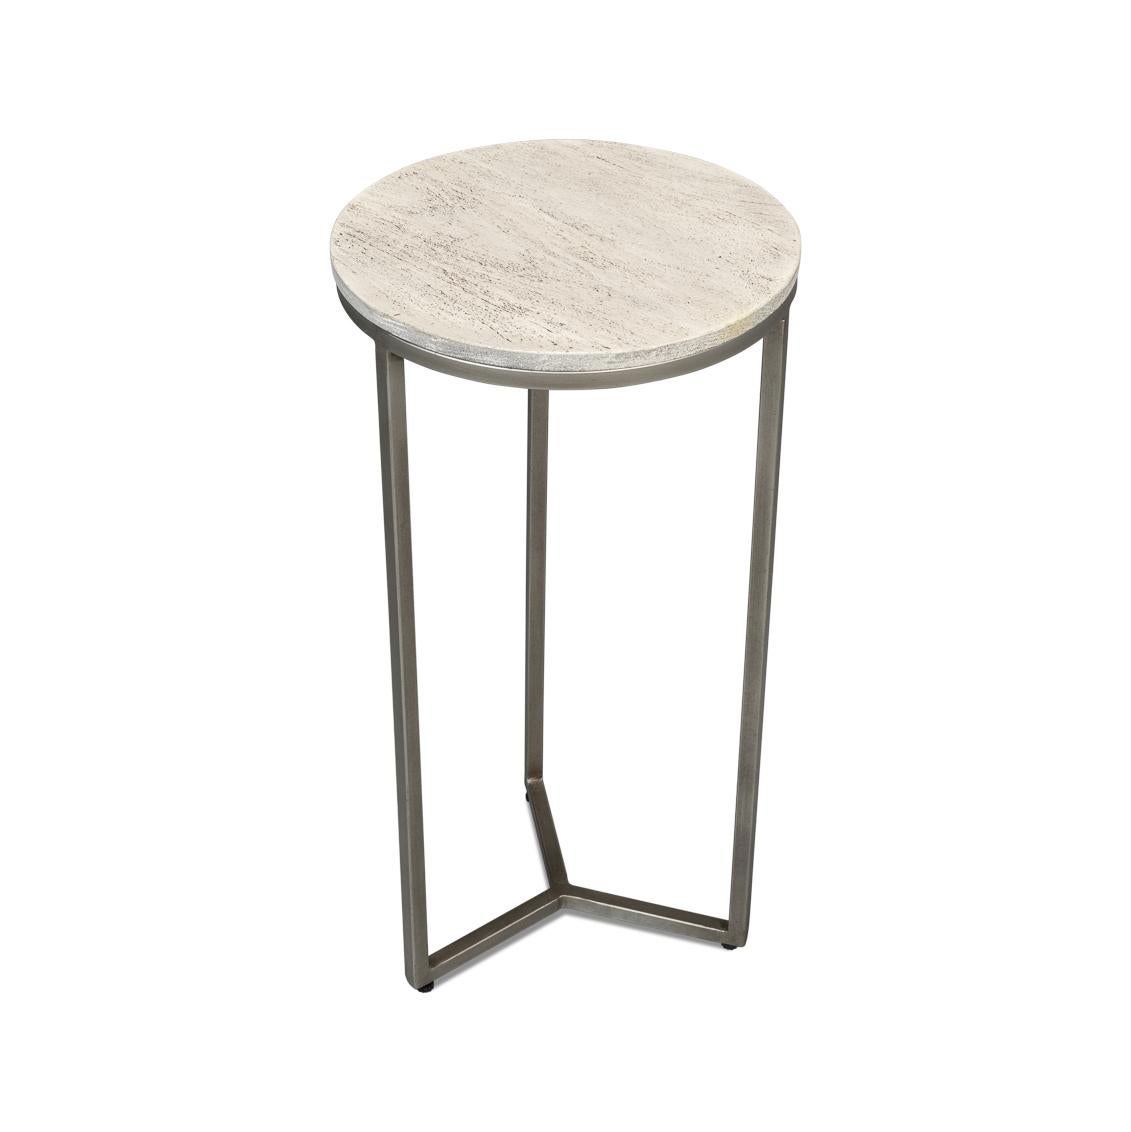 Asian Minimalist Round Drinks Table For Sale